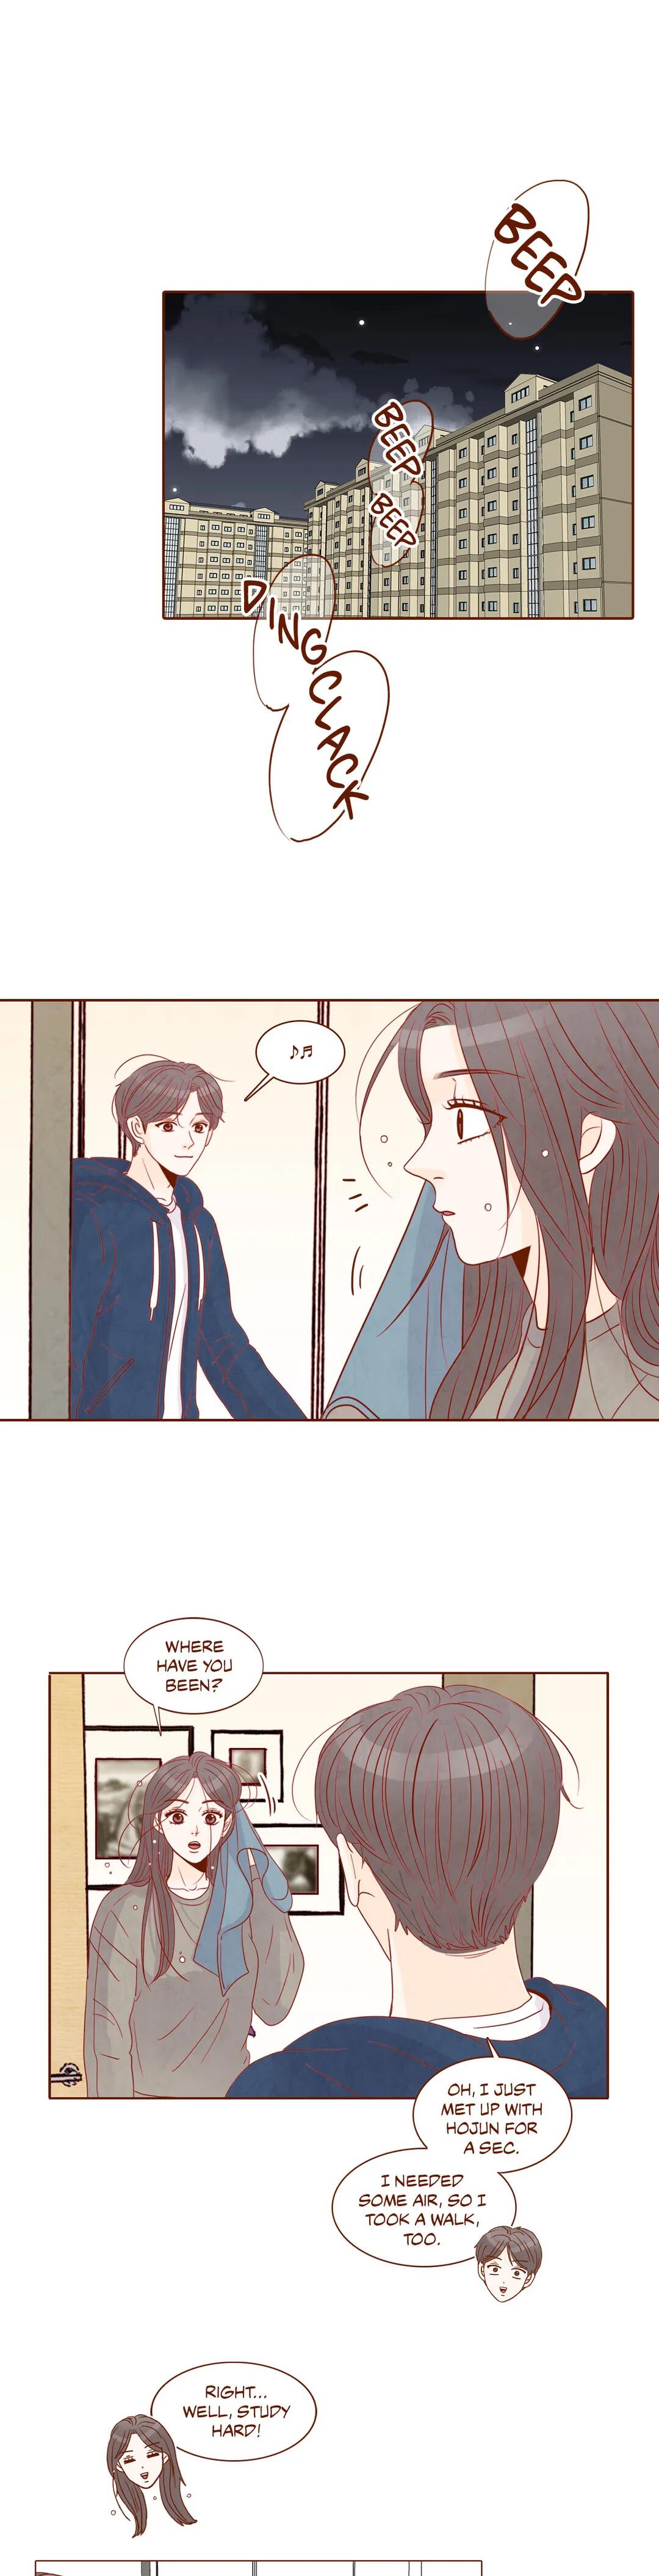 Secret Crush Chapter 102 - Side Story: Am I Doing The Right Thing? - Picture 1